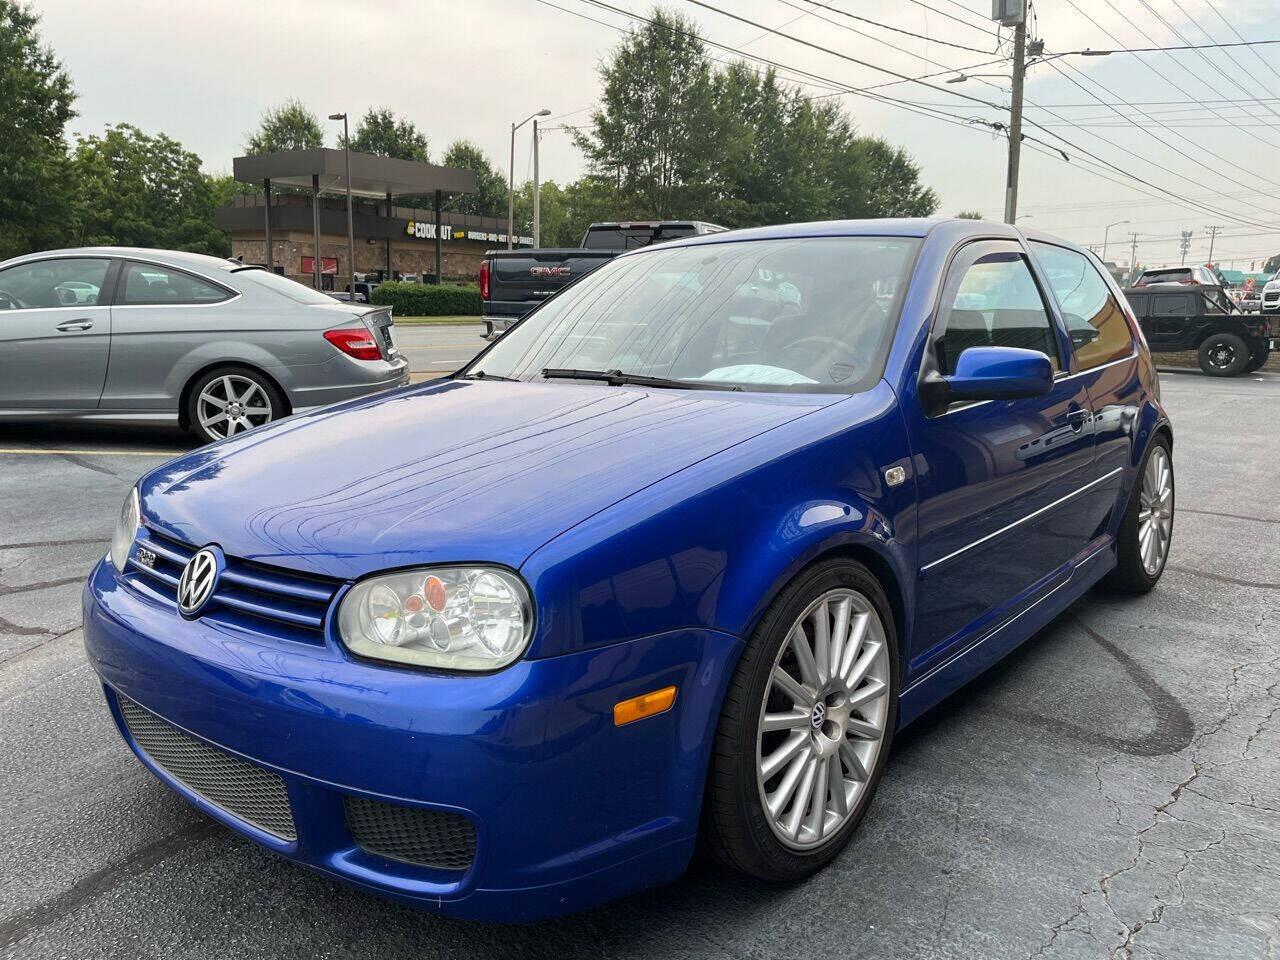 2004 Volkswagen Golf (Mk4) R32 - DSG for sale by auction in